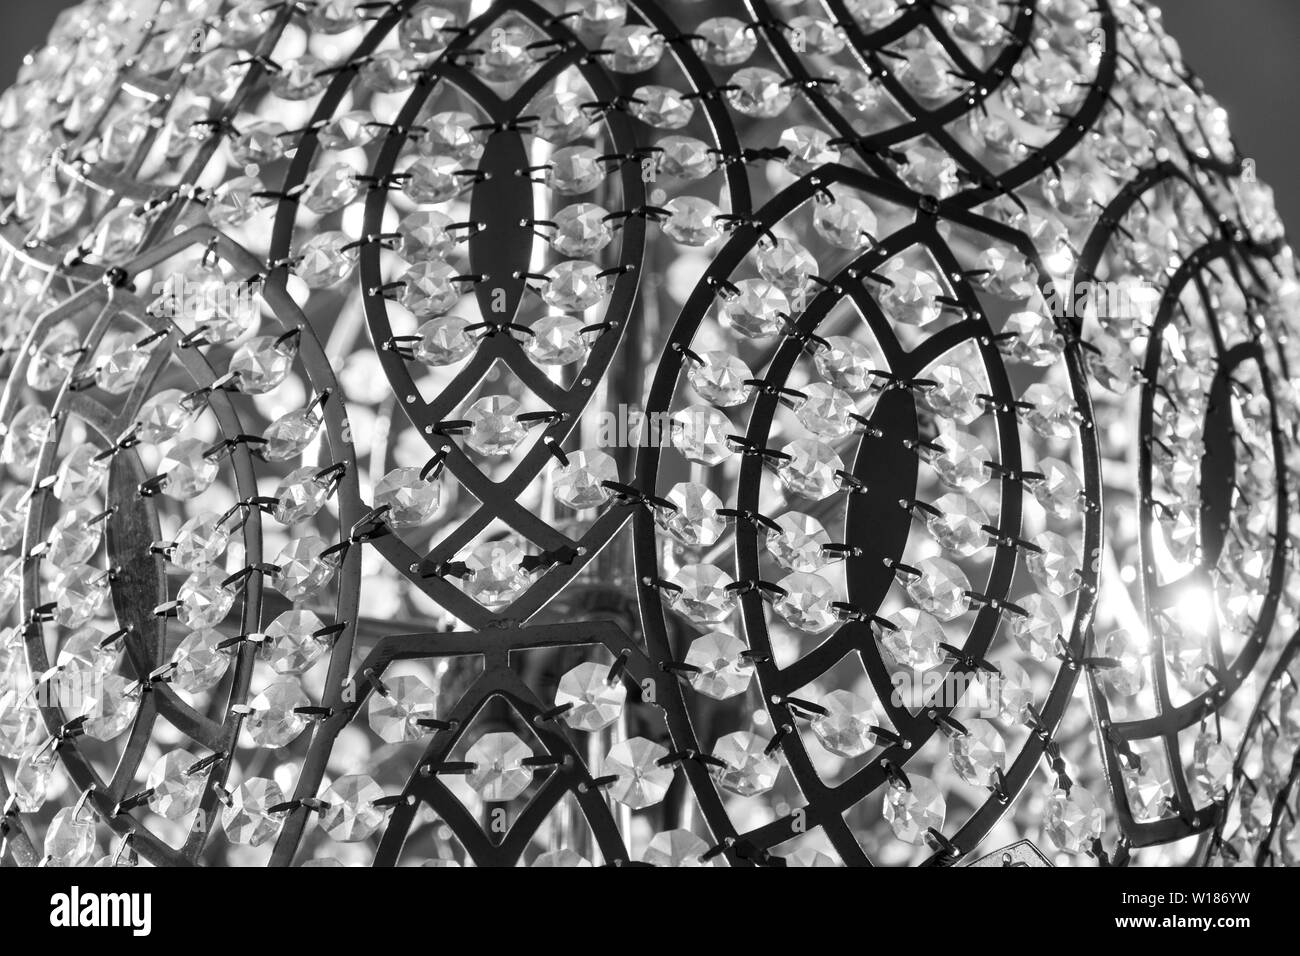 Abstract steel design art with stunning reflections Stock Photo